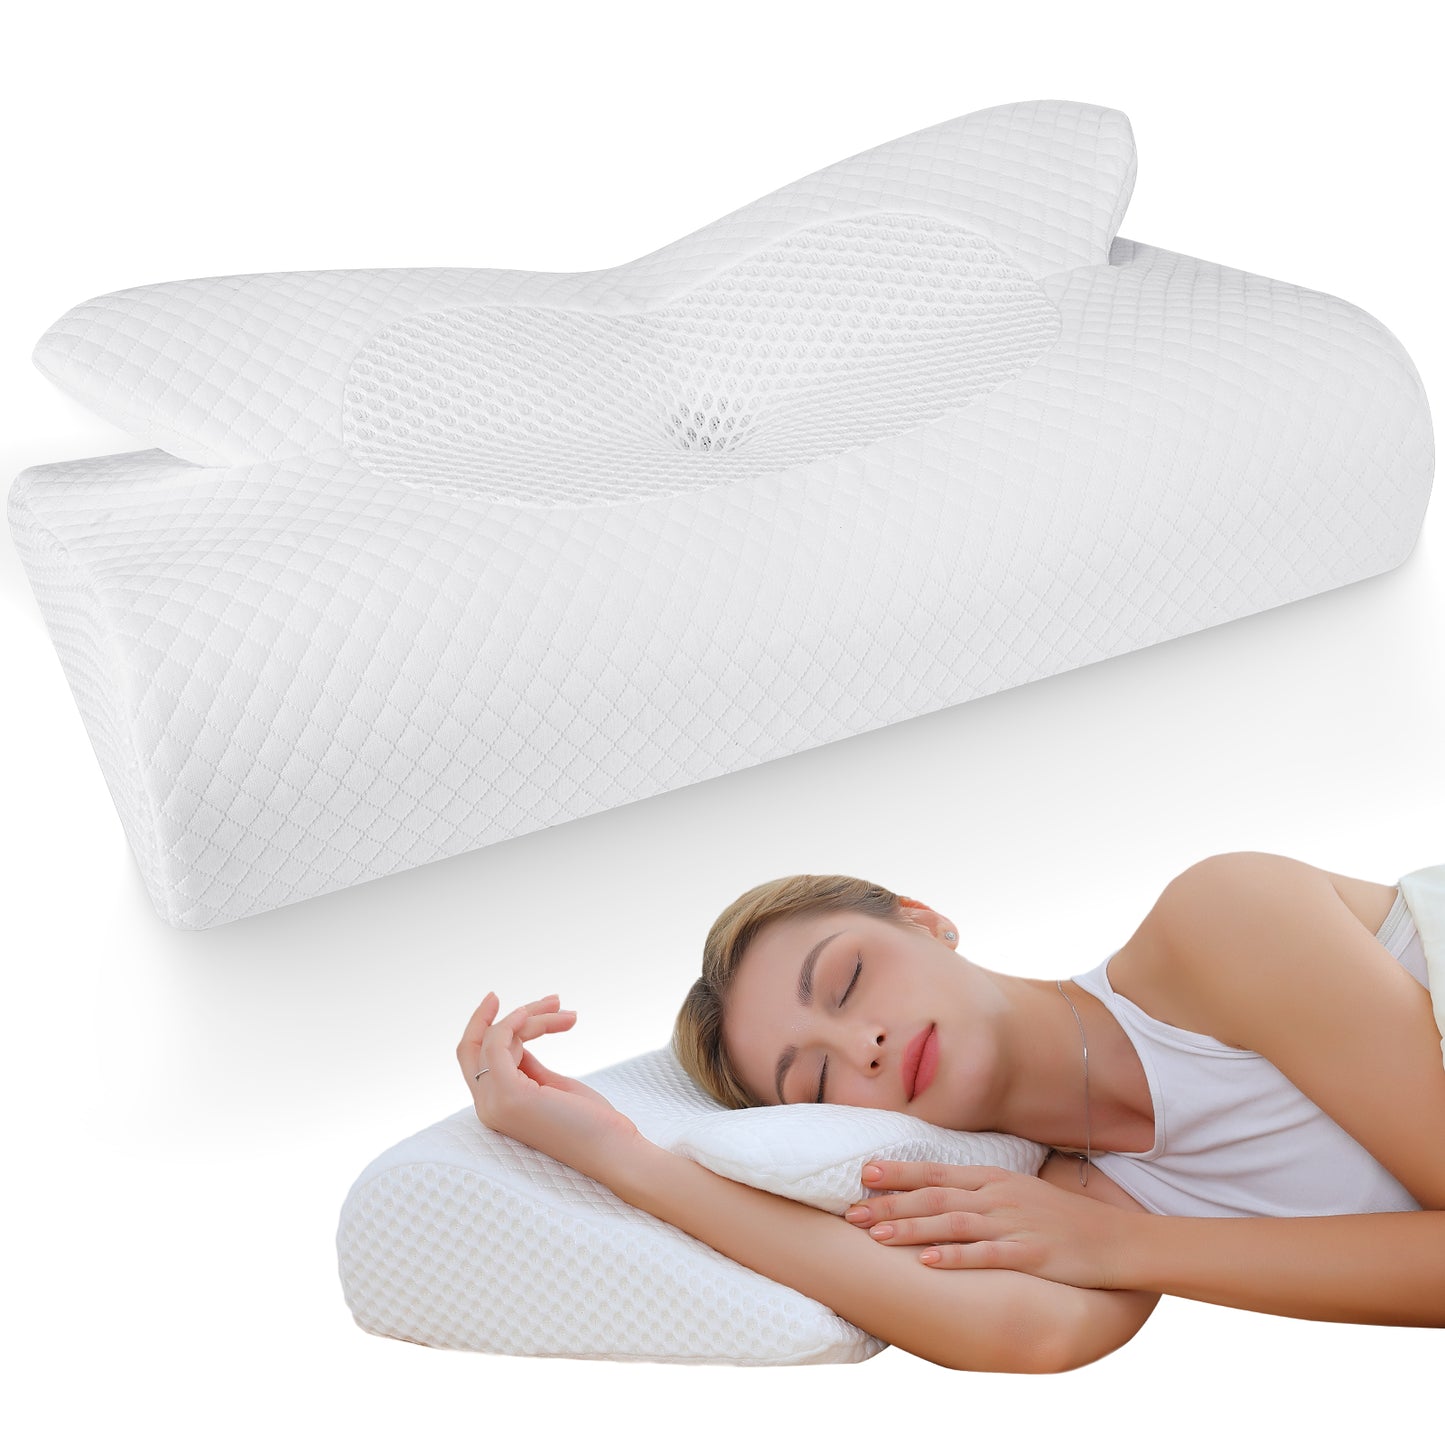 Sammons Preston Cervical Support Pillow - Prioritize Comfort and Spinal  Health